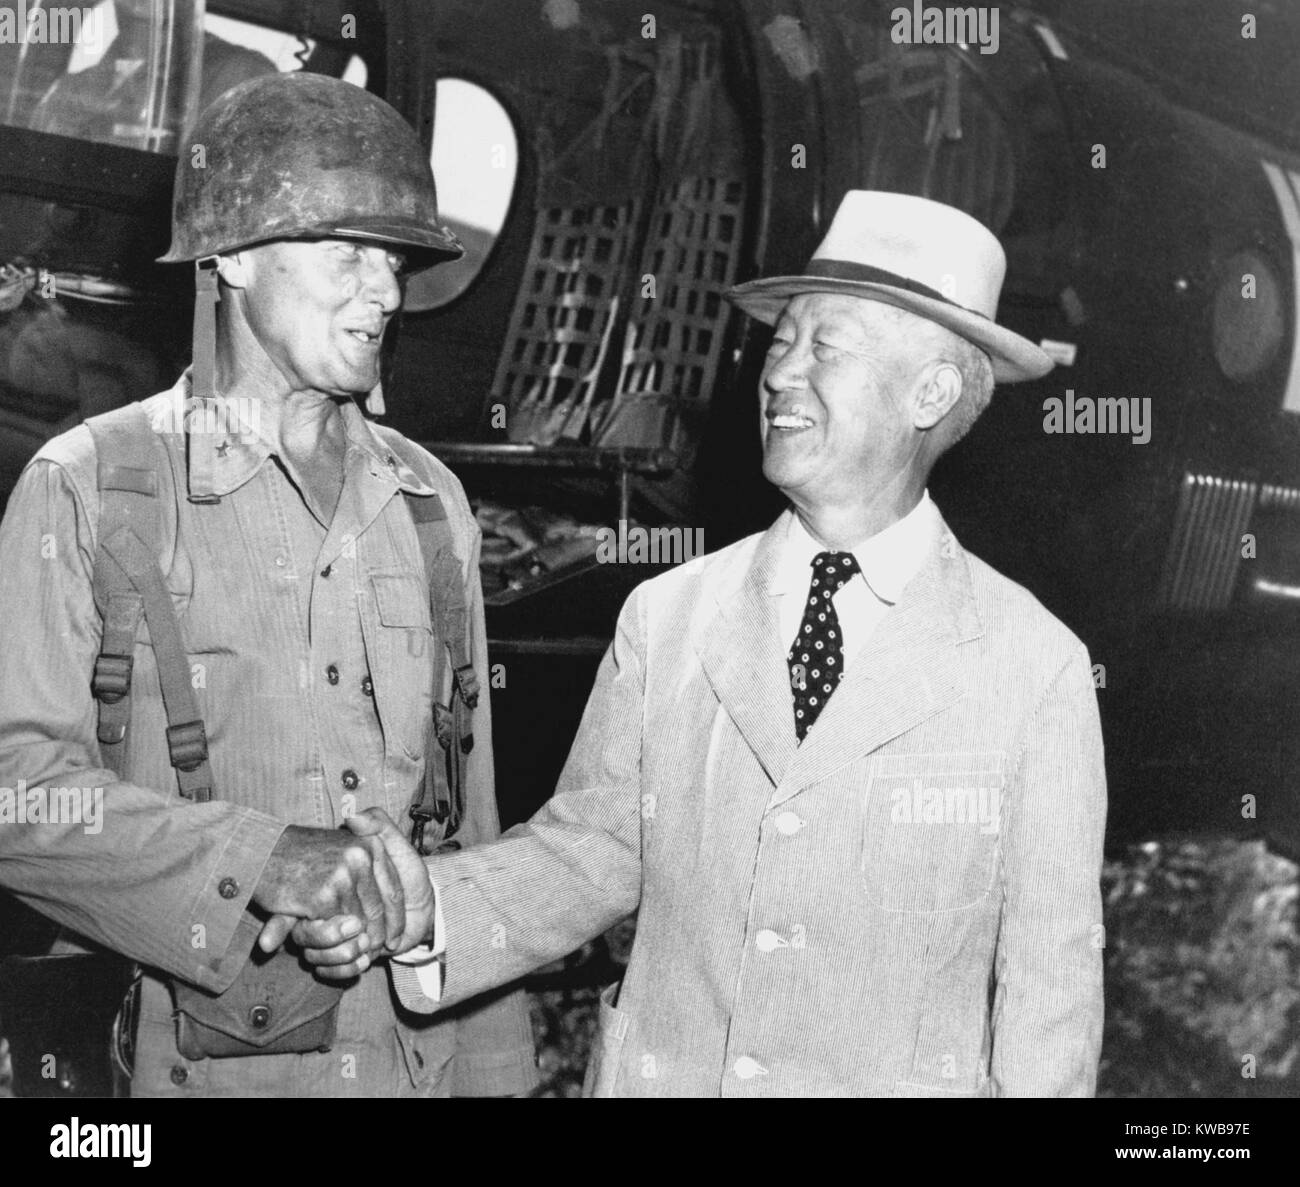 South Korean President Syngman Rhee with U.S. General Edward Craig. Craig commanded the highly effective 1st Marine Provisional Brigade during the Battle of the Pusan Perimeter. Aug. 27, 1950. Korean War, 1950-53. (BSLOC 2014 11 254) Stock Photo